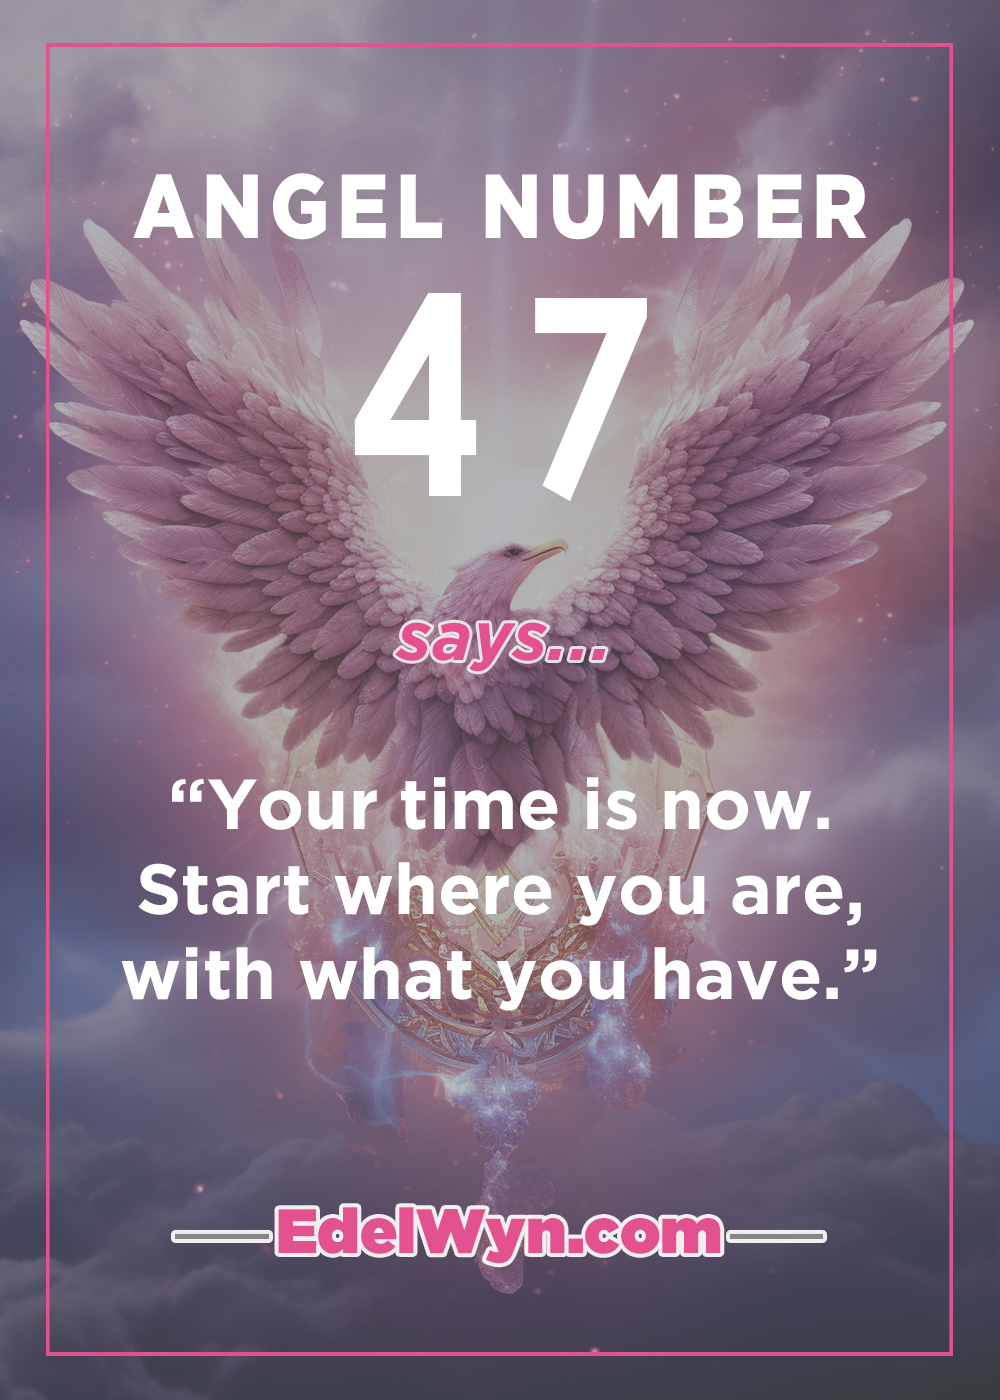 Angel Number 47 Is A Unique Power Number. This Is Why…